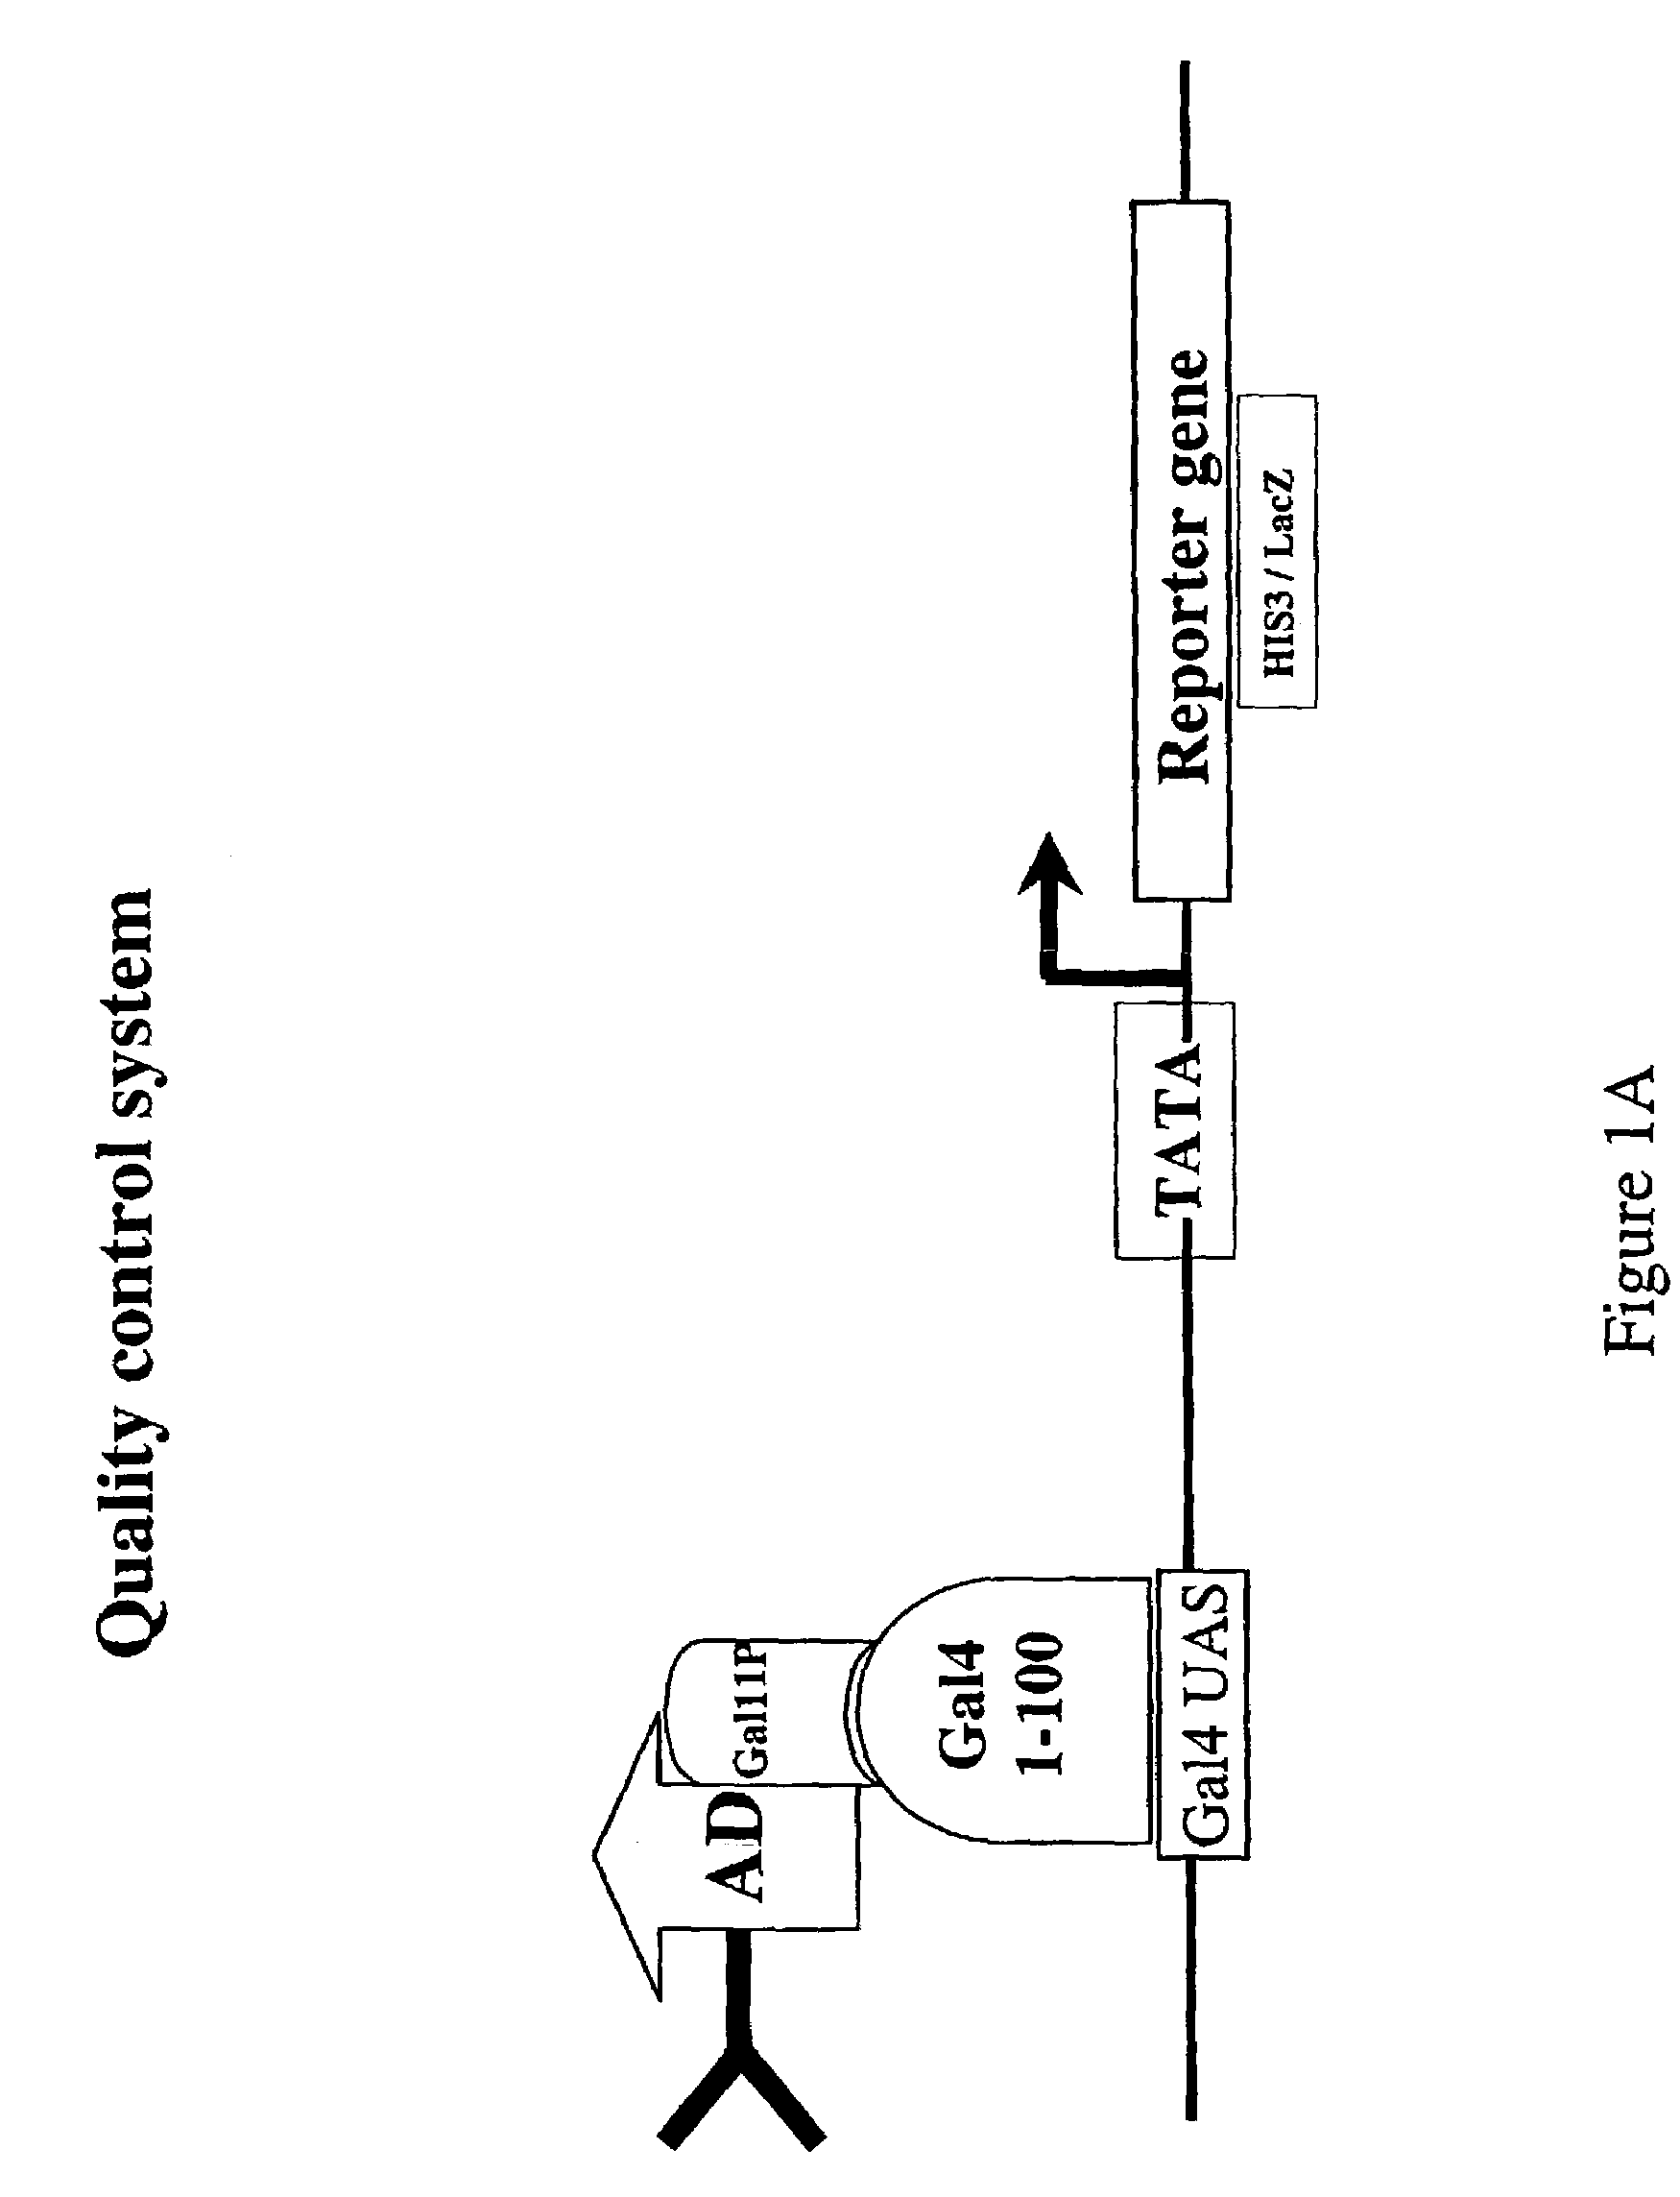 Intrabodies with defined framework that is stable in a reducing environment and applications thereof